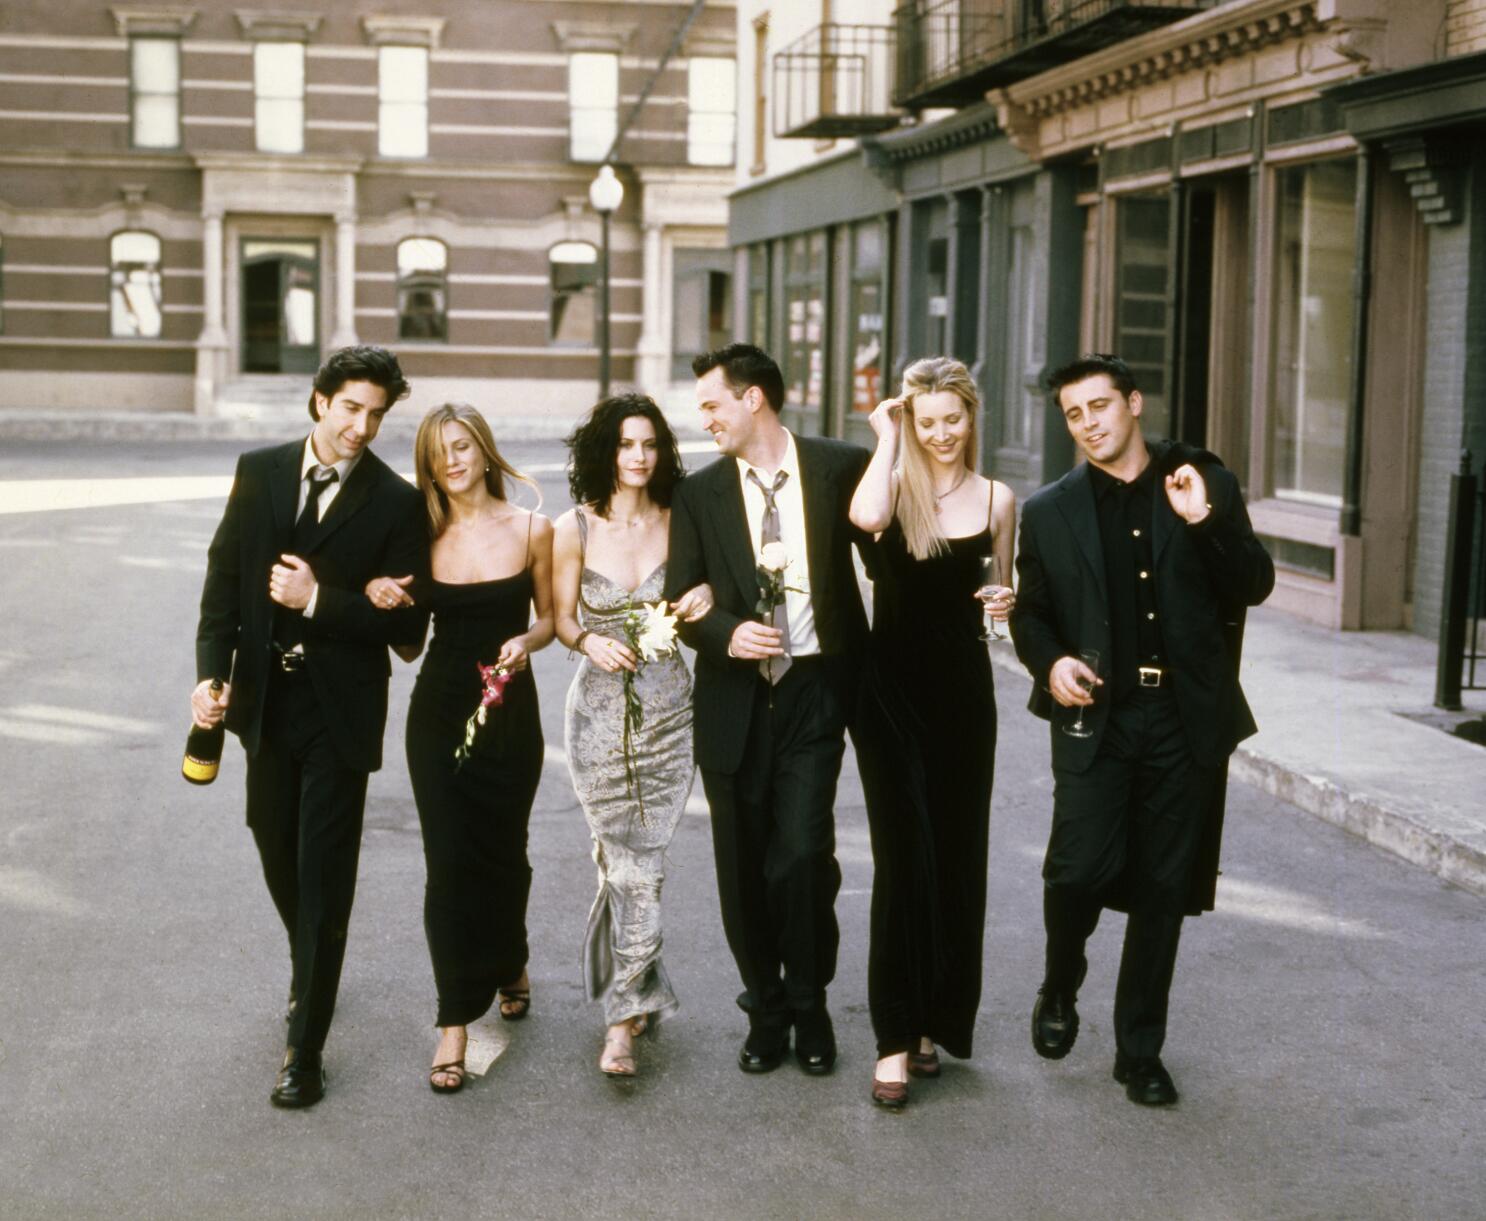 Friends' cast remembers Matthew Perry: 'We are all so utterly devastated